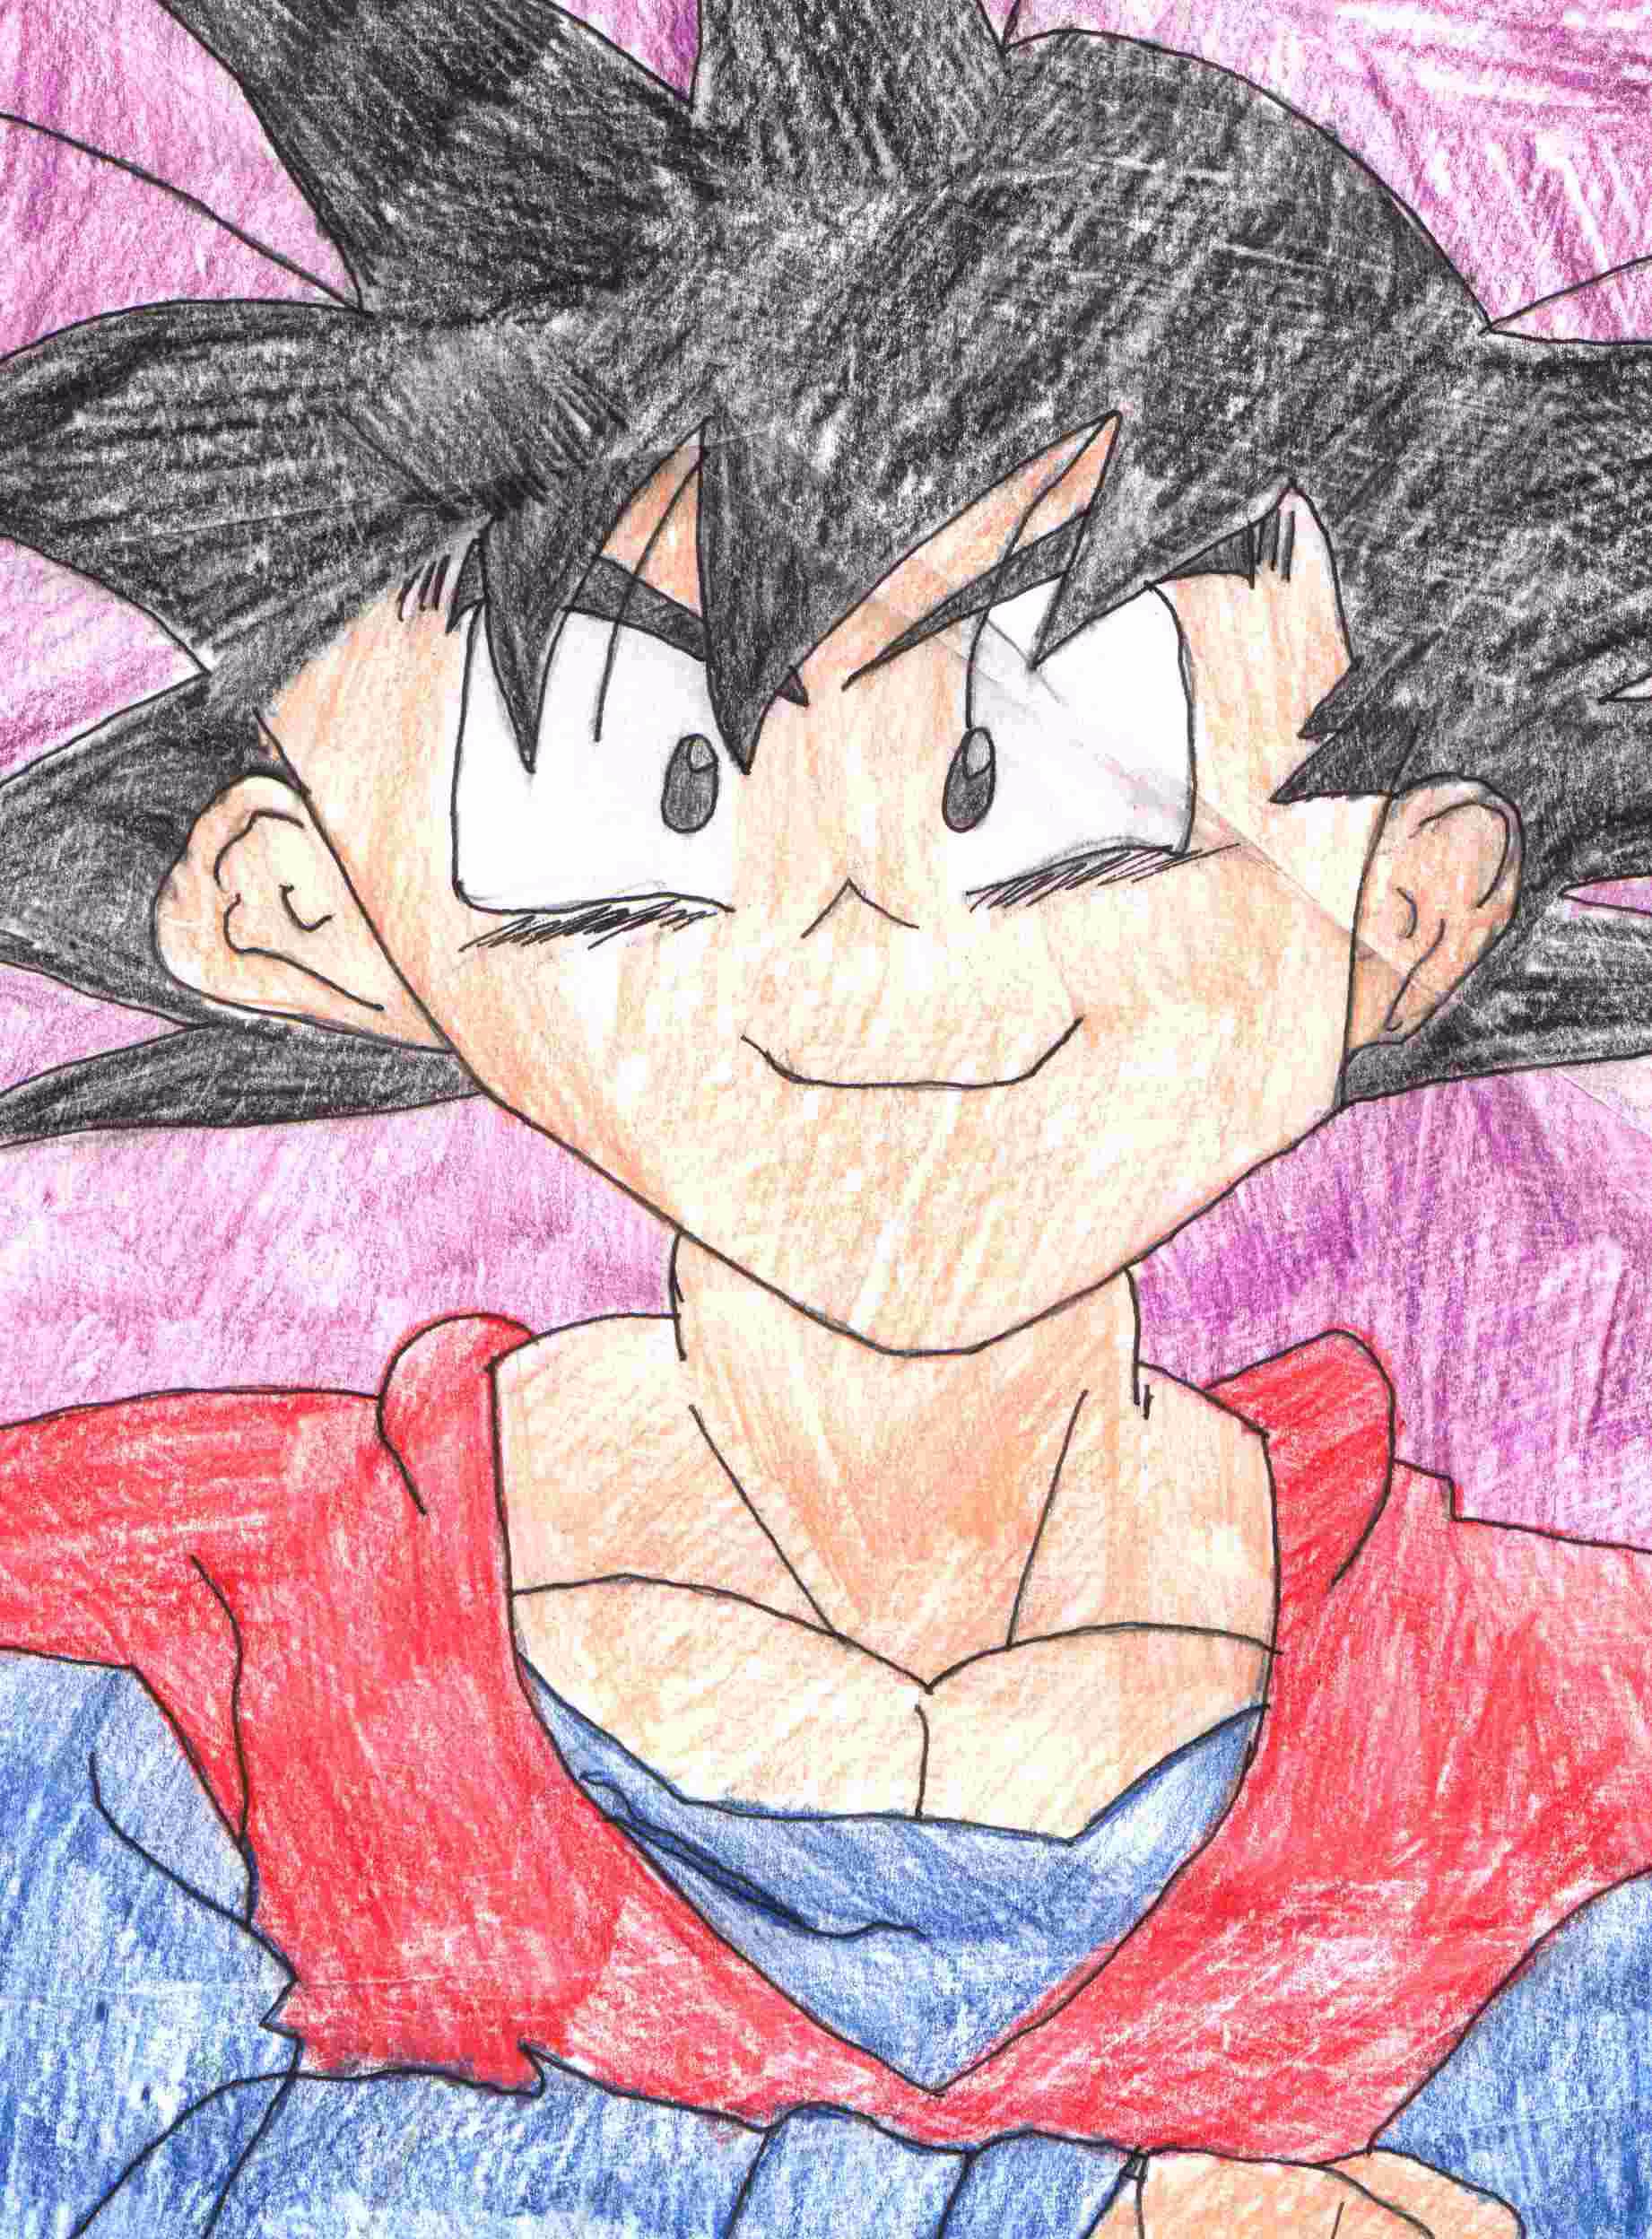 This is one of my friend's old ones.I think it was a Goten but im not certain.